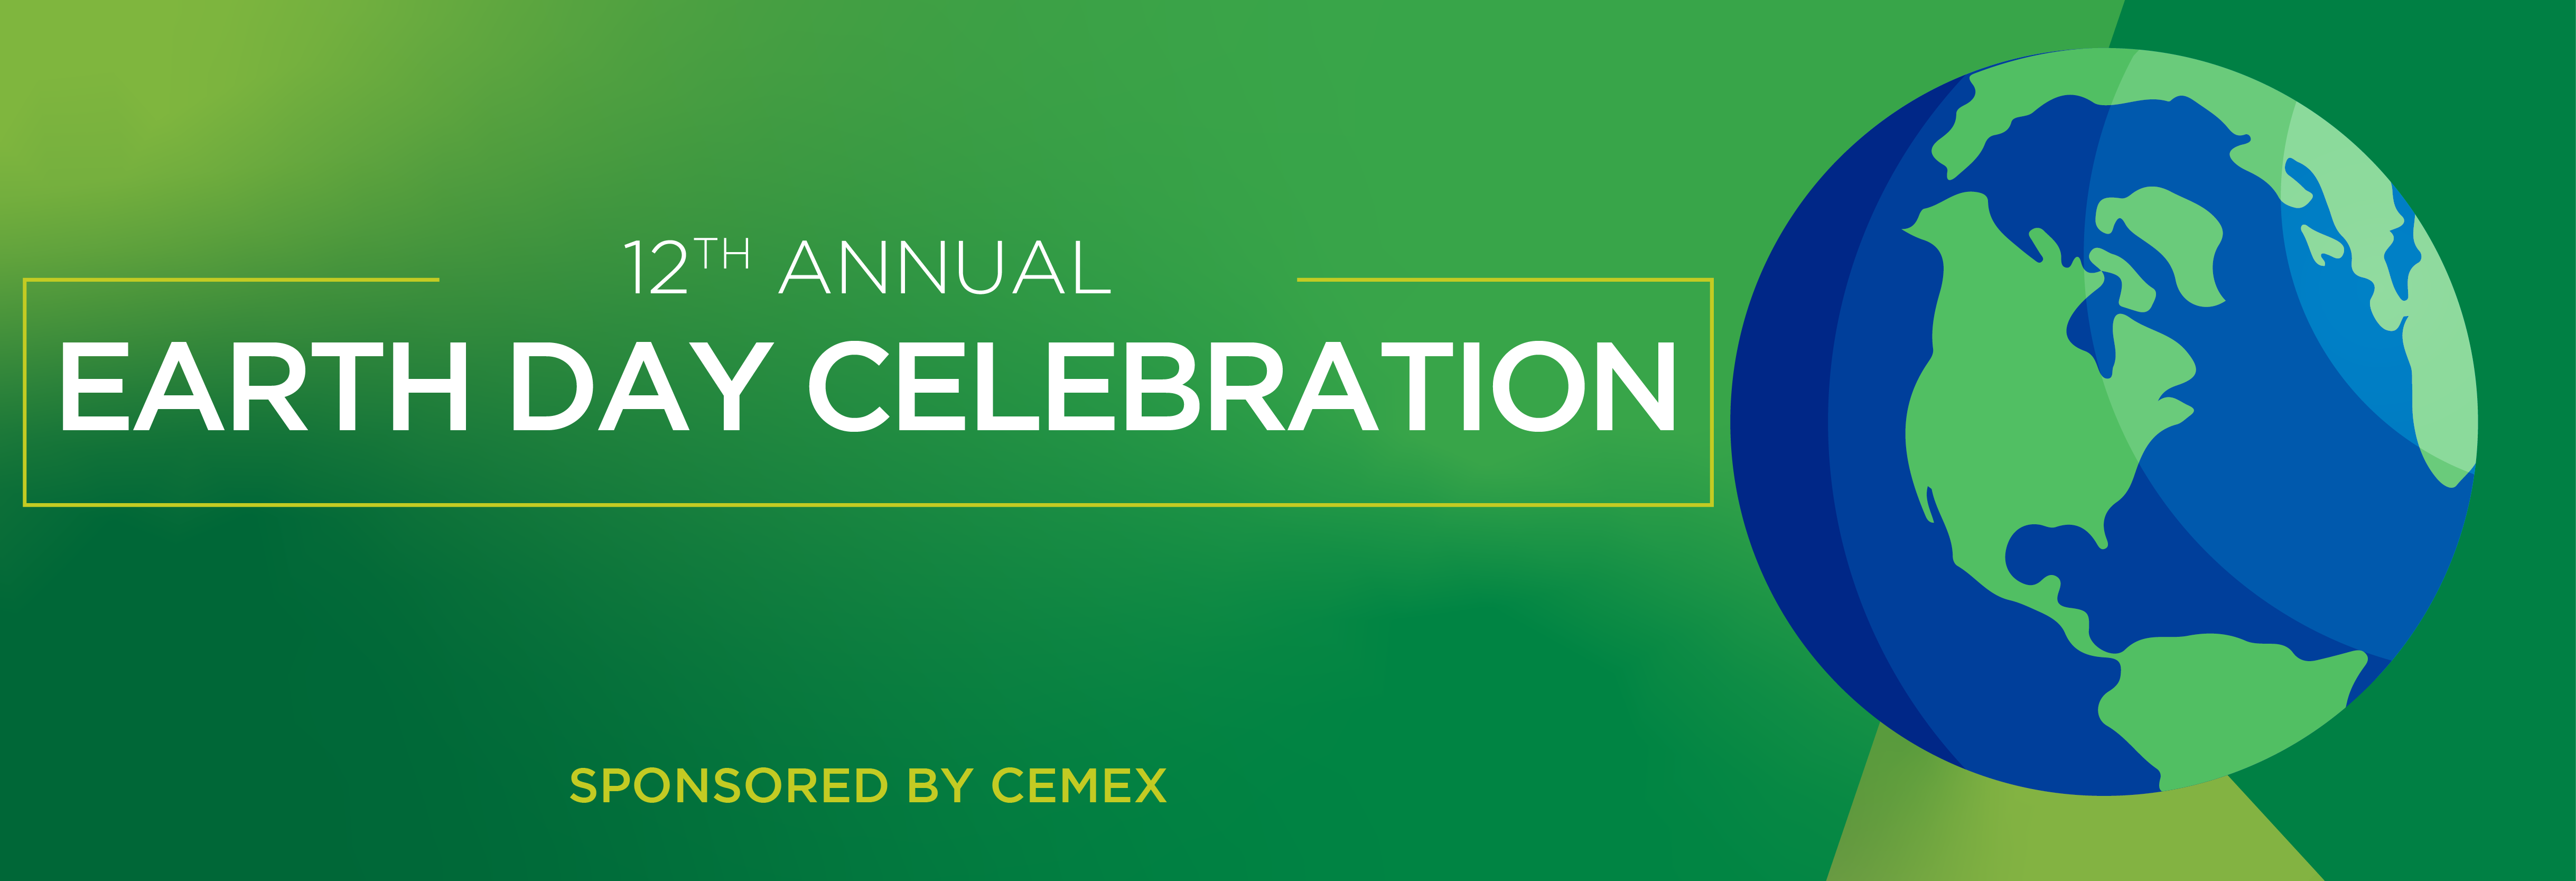 12 Annual Earth Day Celebration Sponsored by CEMEX